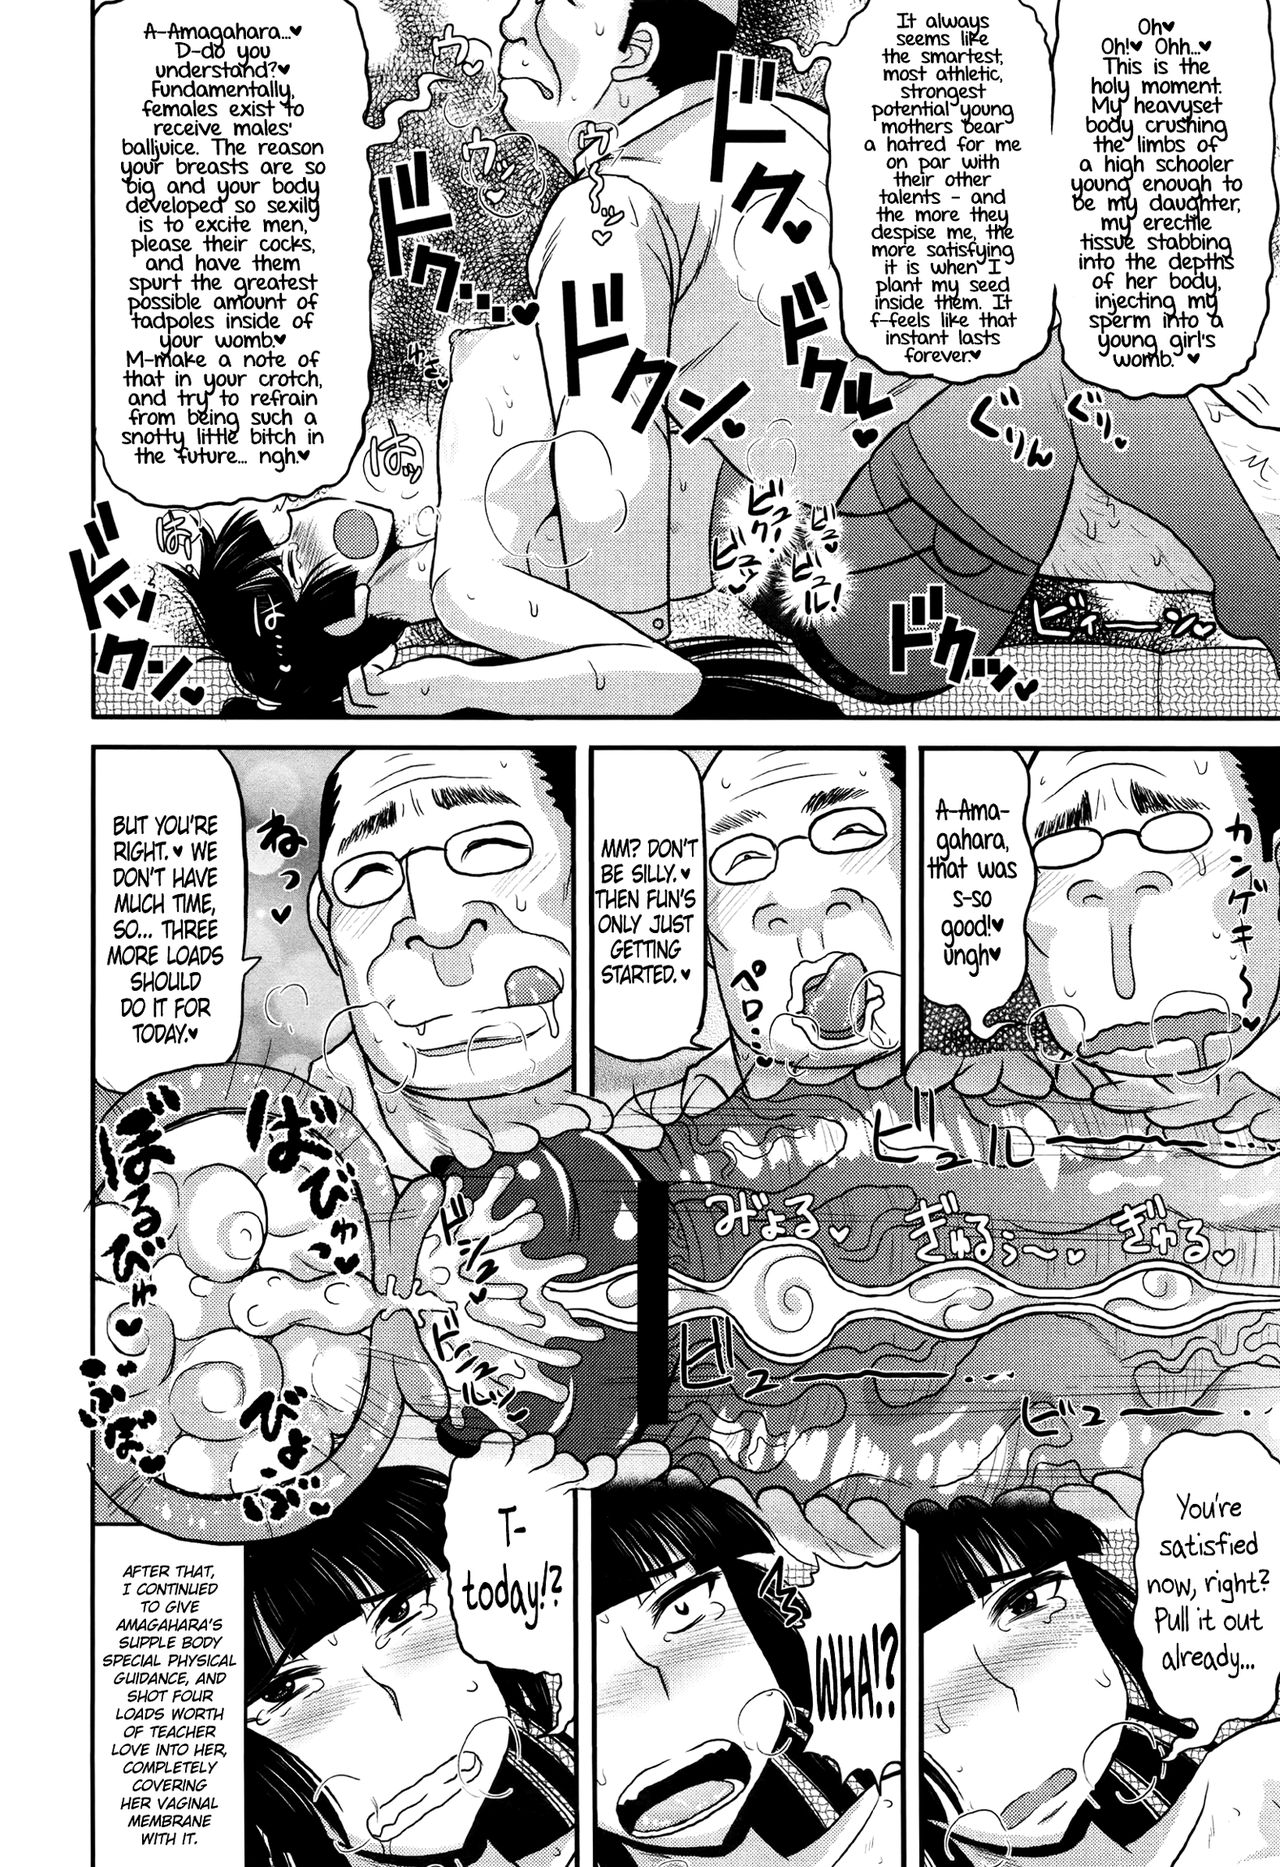 [Deep Valley] Meshibe to Oshibe to Tanetsuke to -Dai 2 ban- | Stamen and Pistil and Fertilization Ch. 2 (COMIC MASYO 2013-03) [English] =LWB= [ディープバレー] メシベとオシベと種付けと-第2犯- (コミック・マショウ 2013年3月号) [英訳]